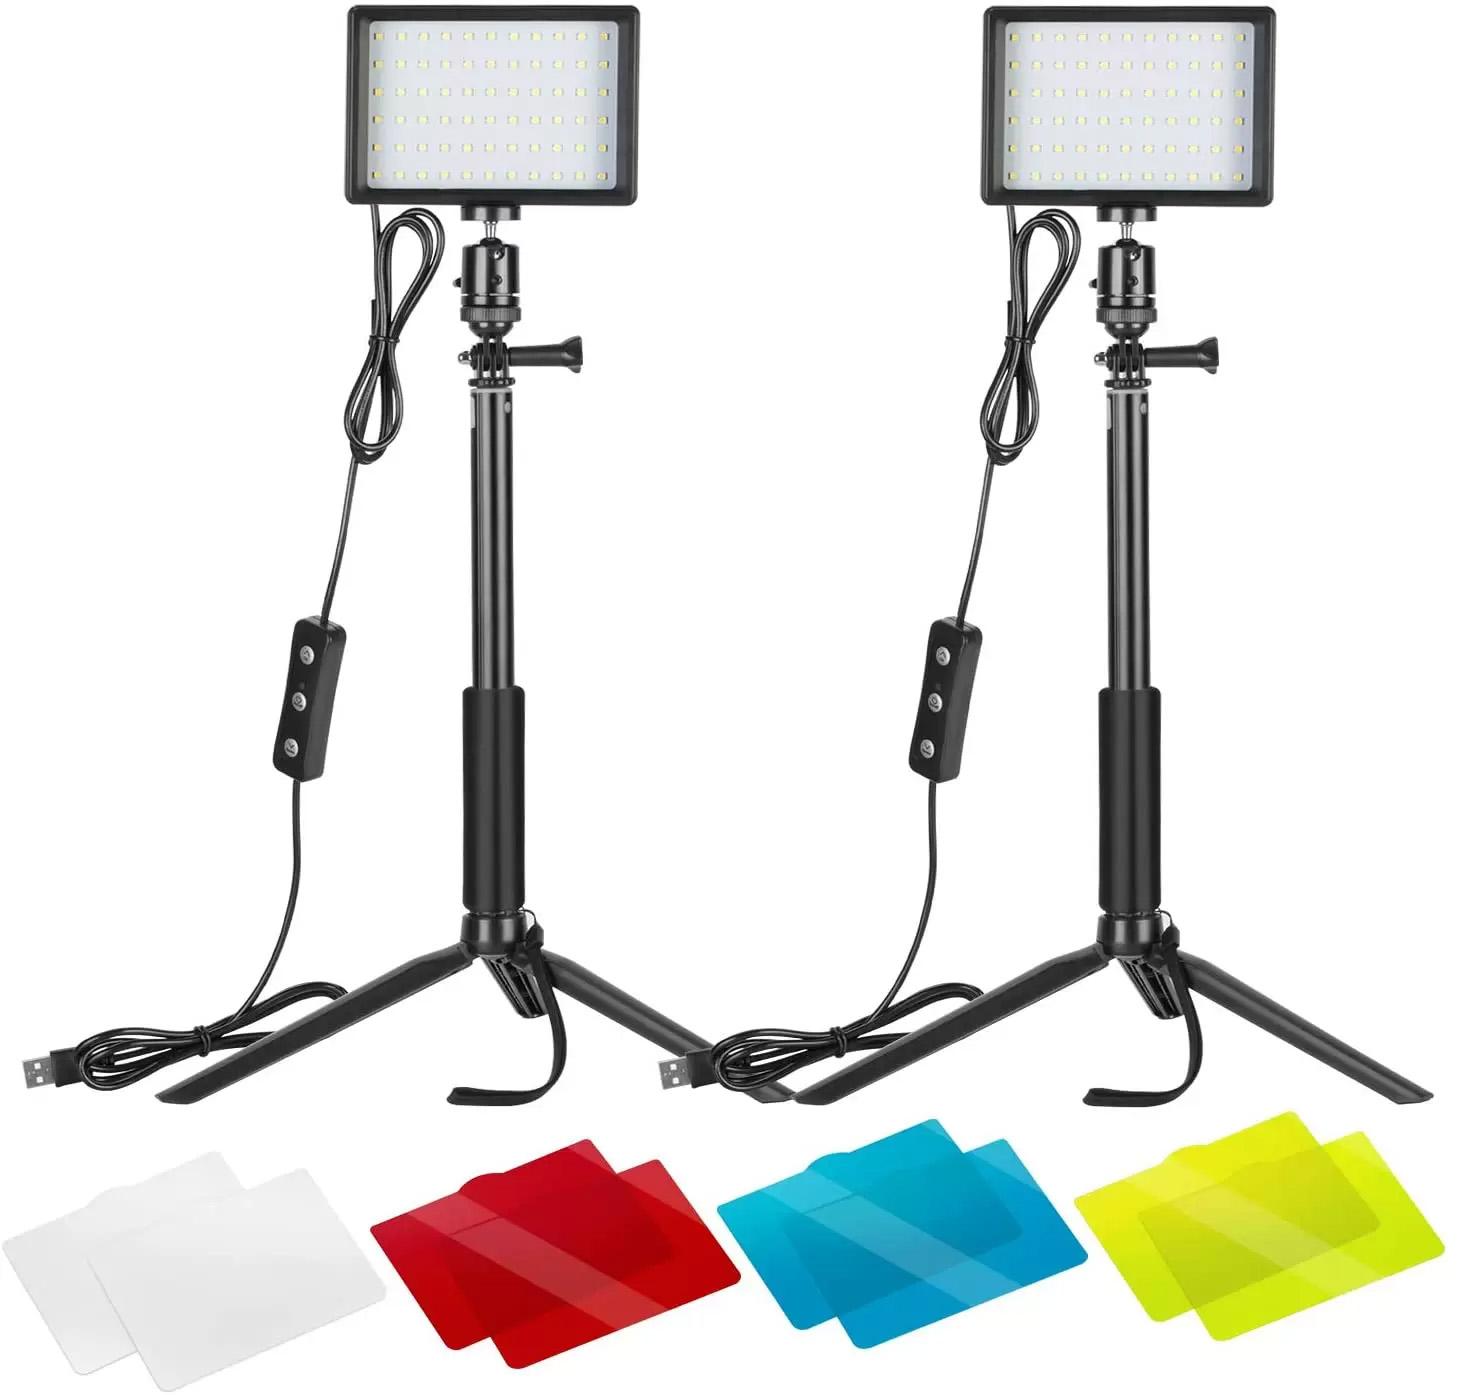 2 Neewer 5600K USB Video Lights for $19.99 Shipped